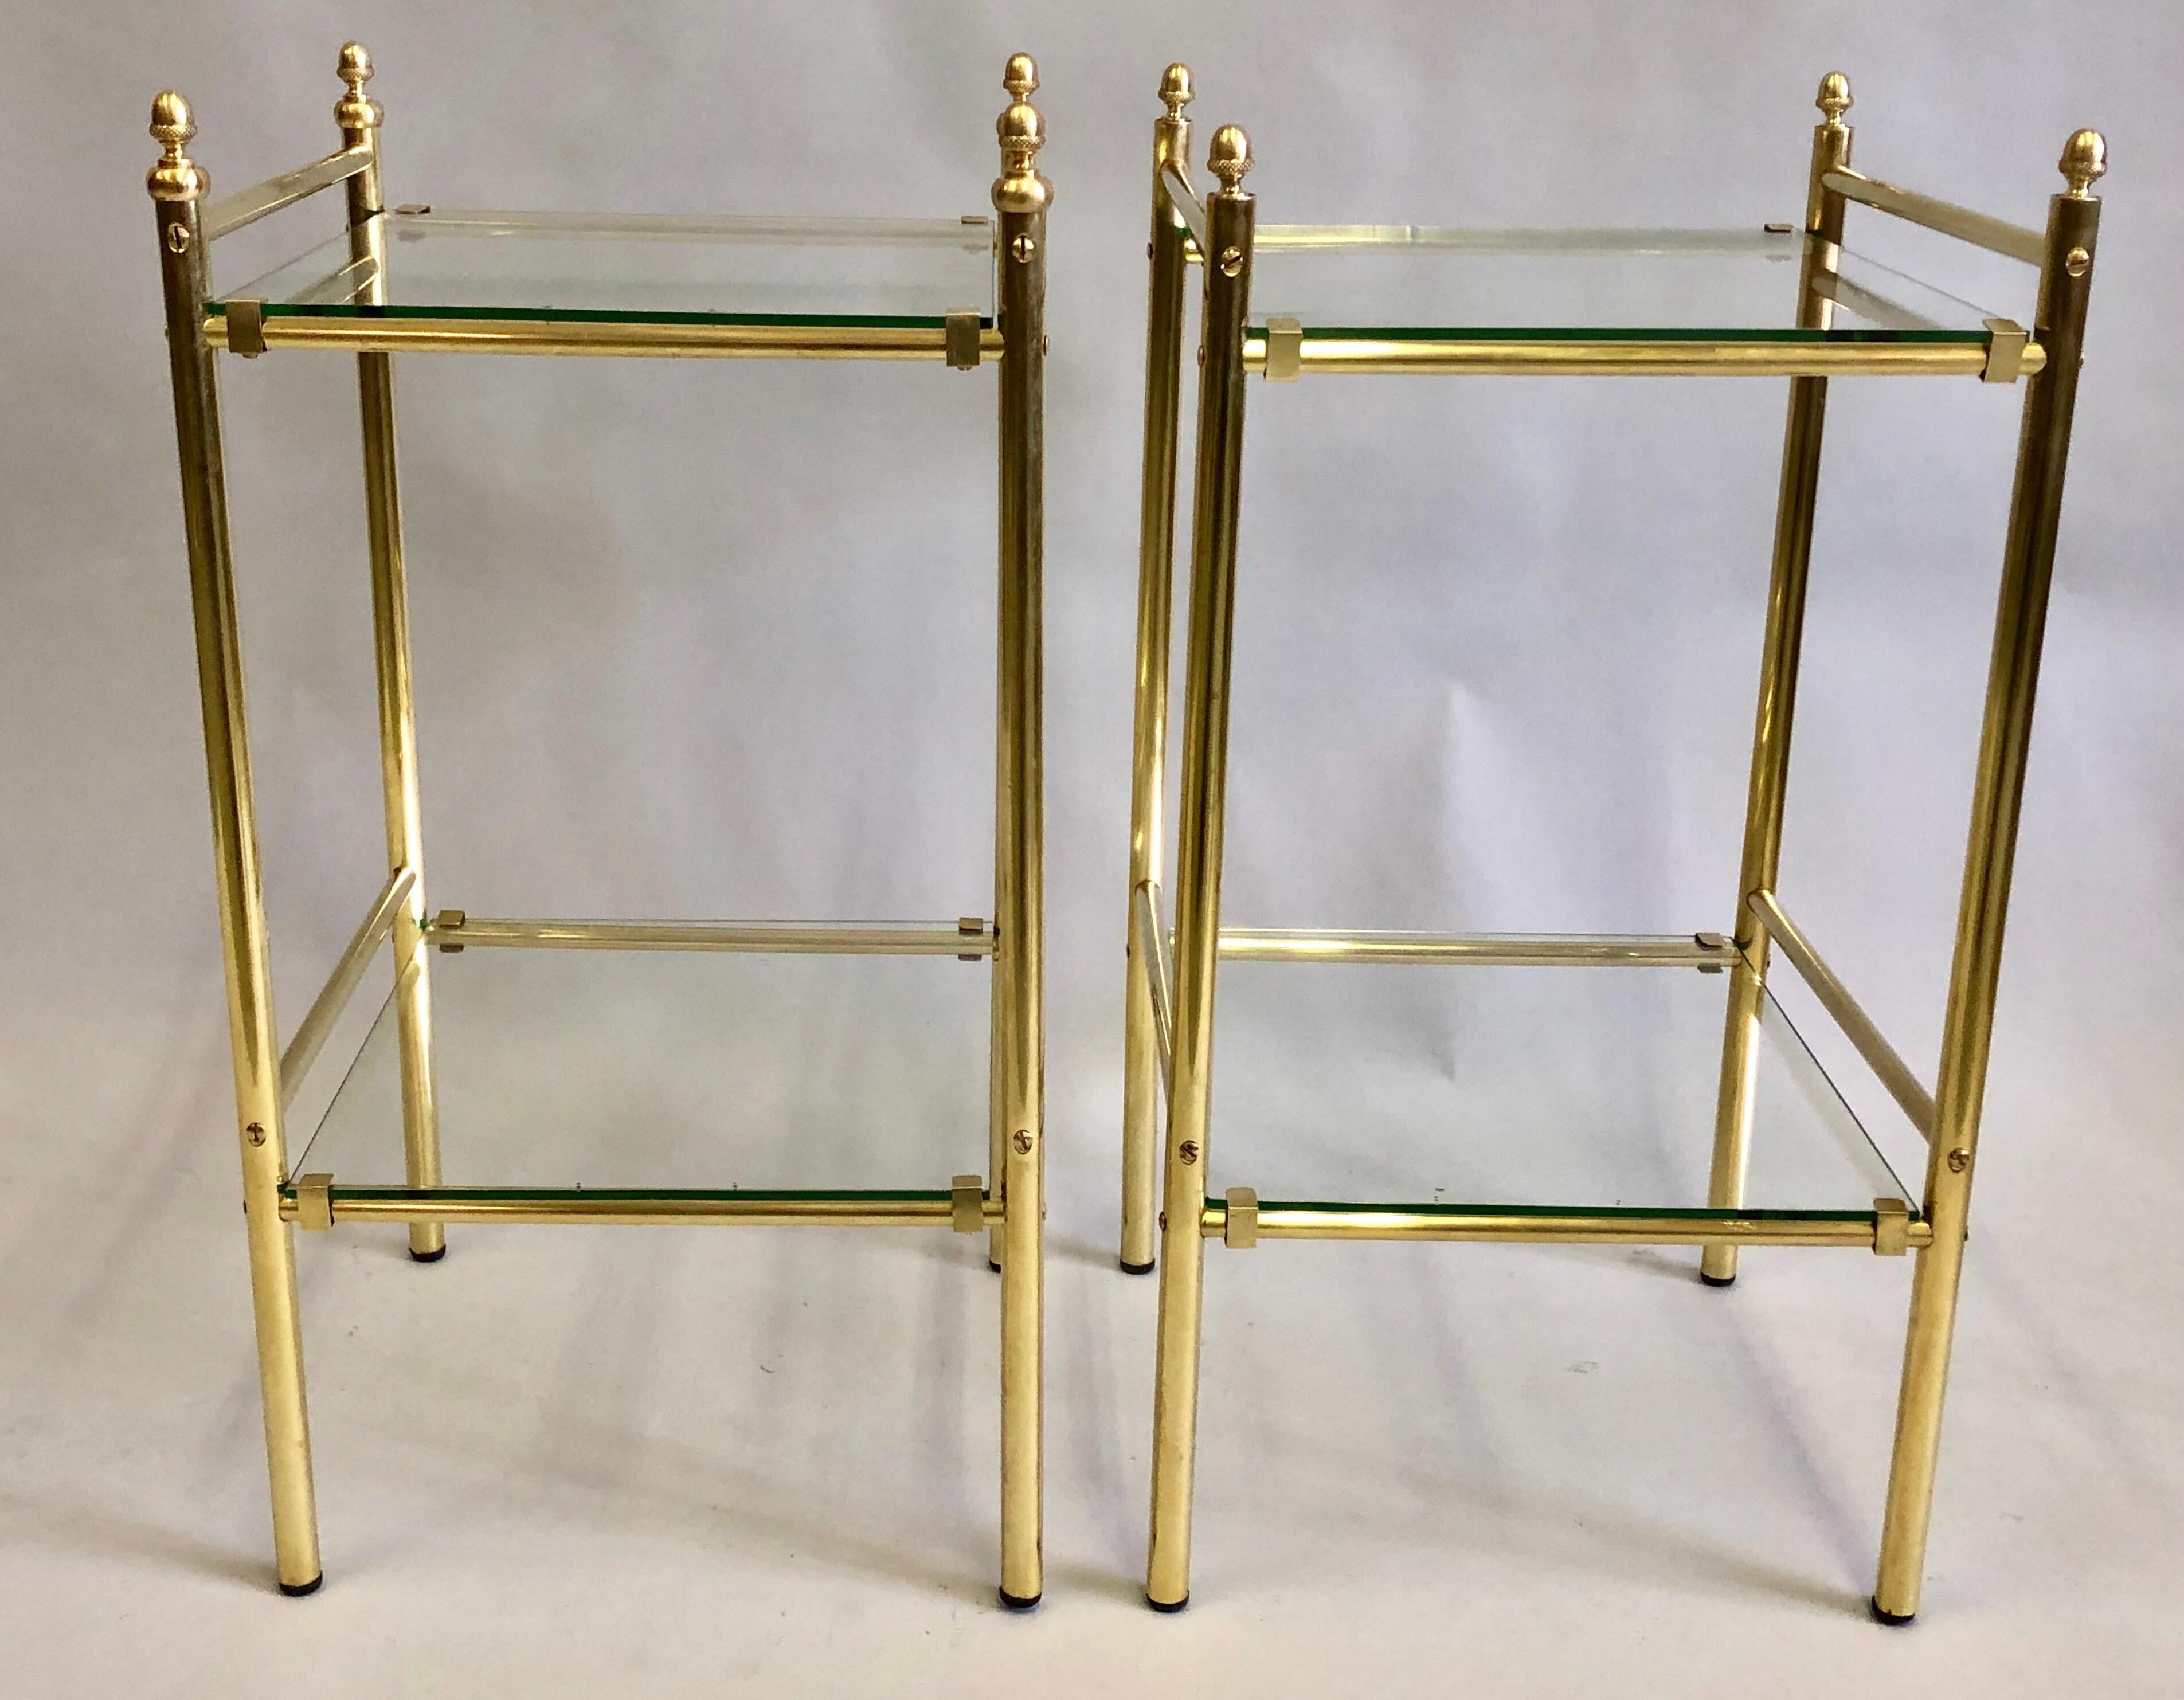 Pair of French Mid-Century Modern neoclassical double level brass side tables / nightstands with original green tint glass tops by Maison Jansen.

These Jansen double tier end tables feature solid brass clips which secure the glass in place and